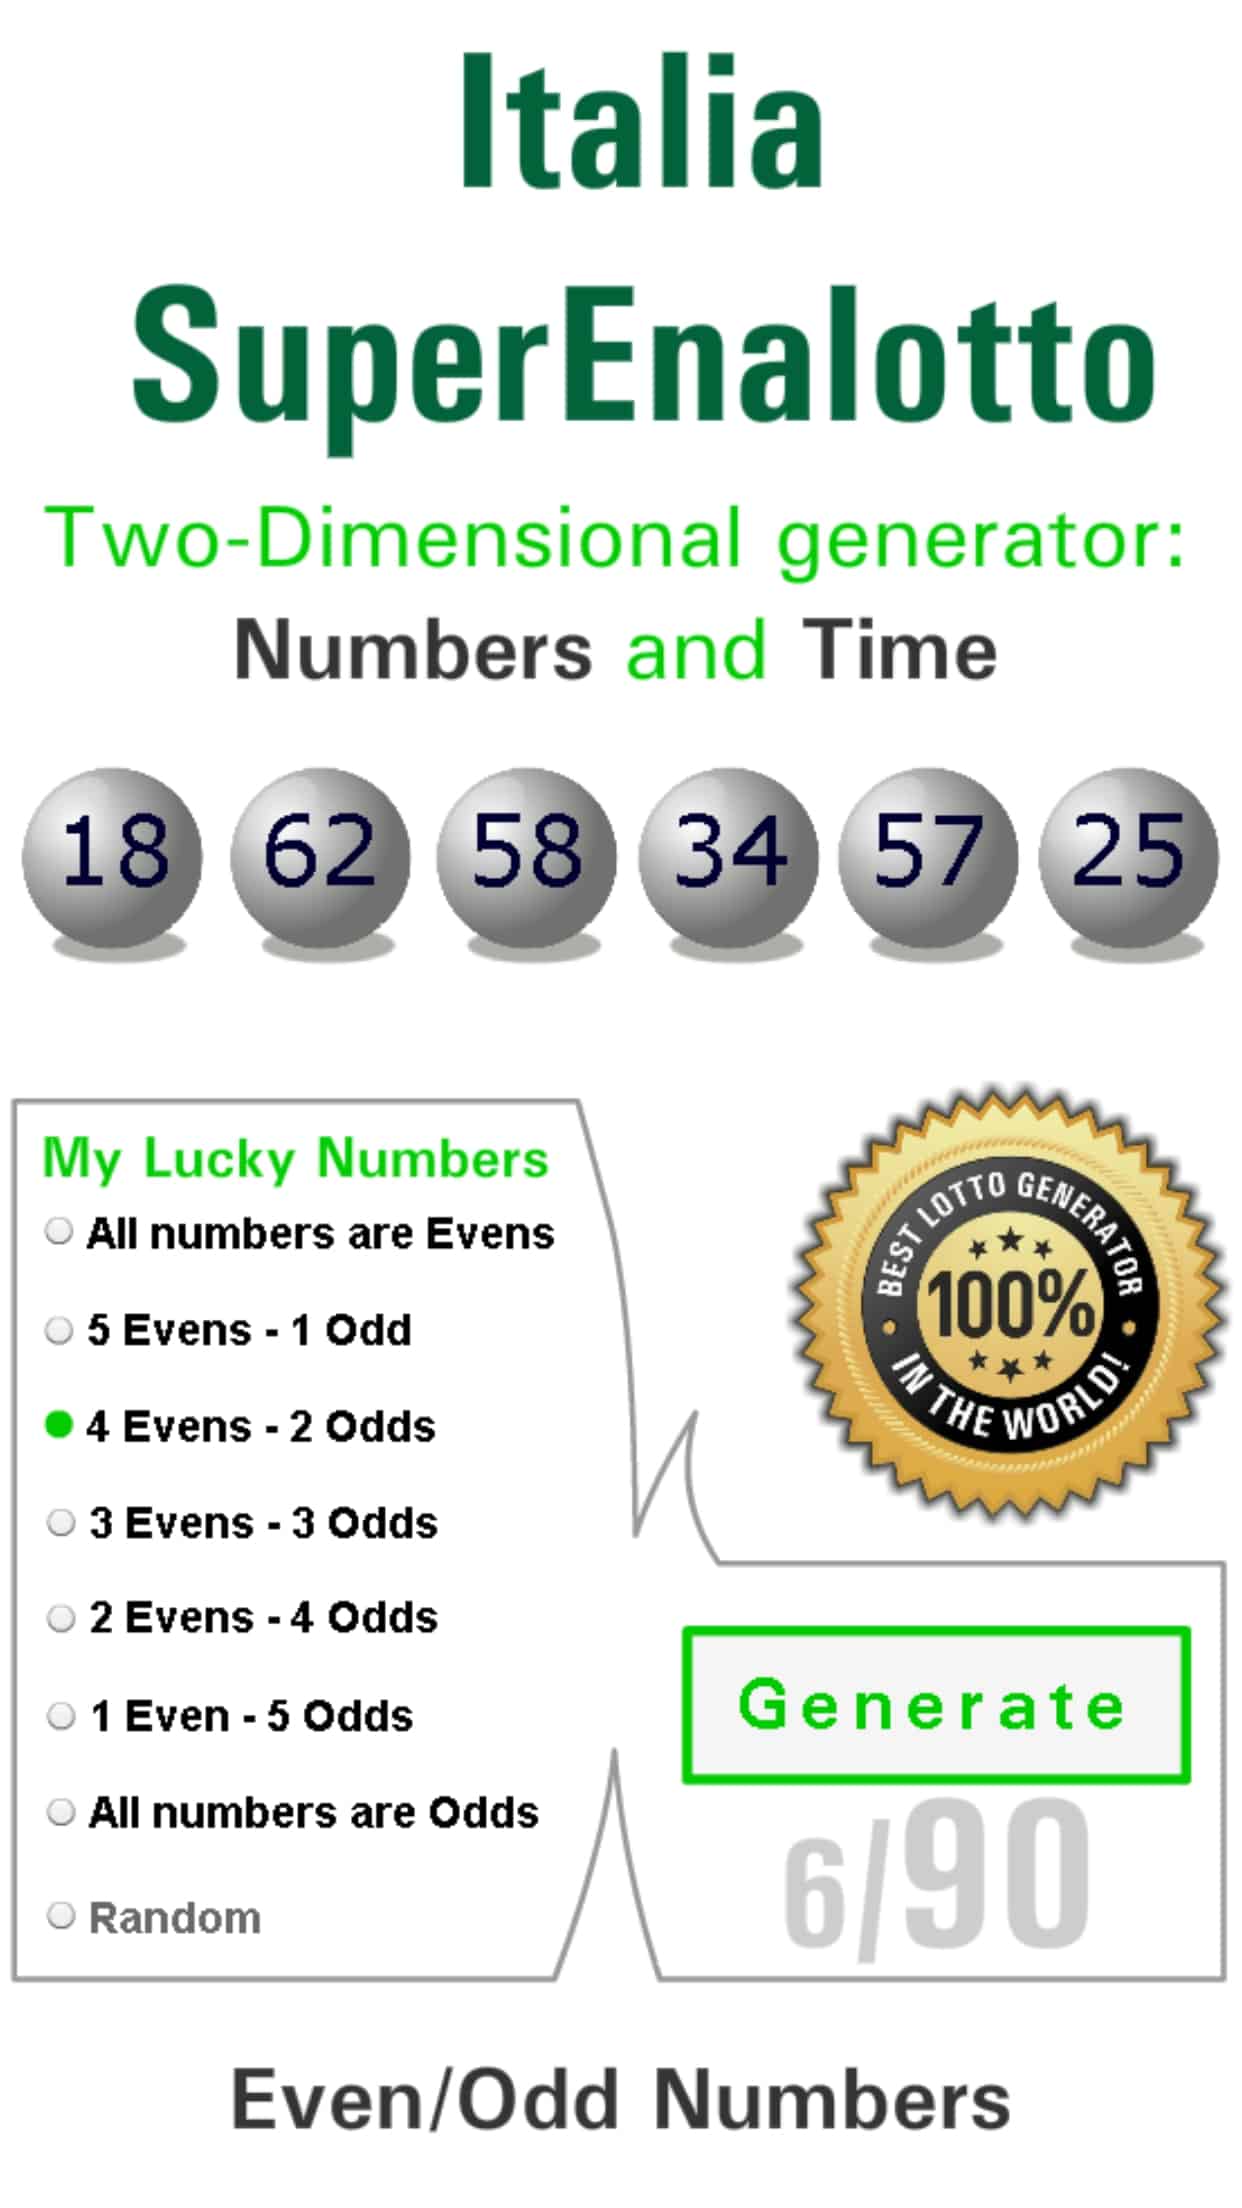 SuperEnaLotto | Italian Lotto | Results, Tips & Winning Numbers